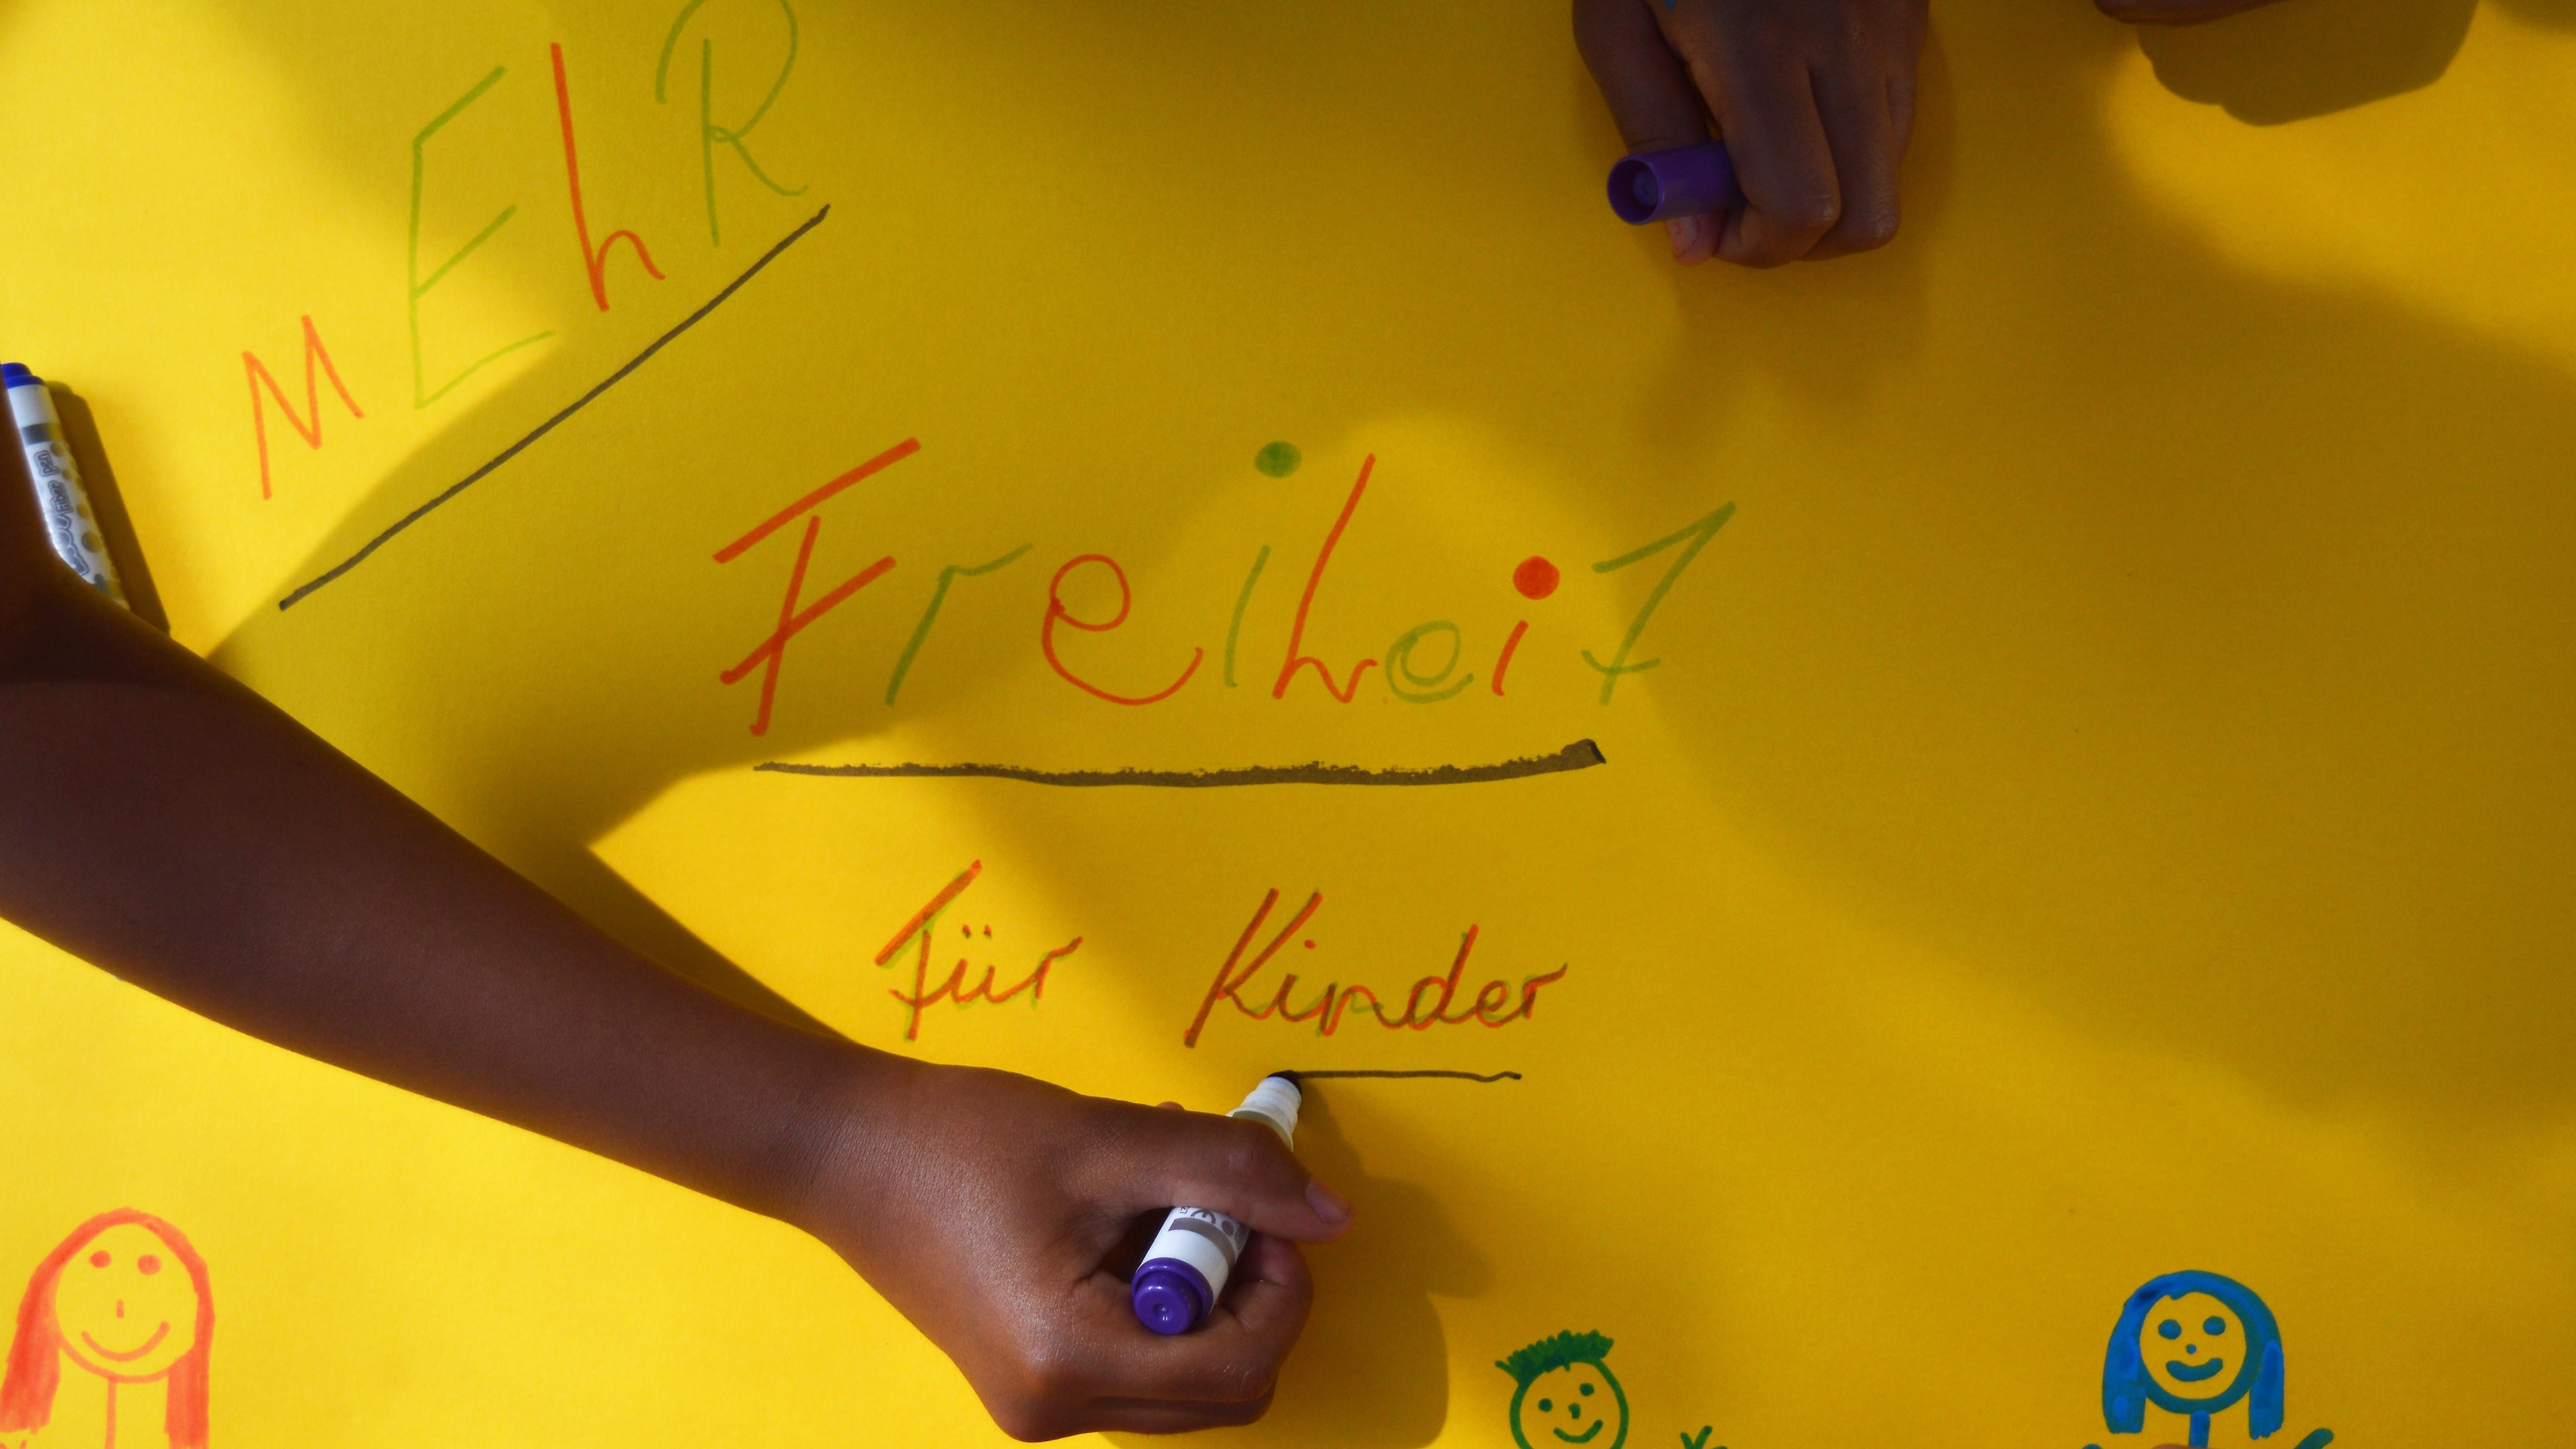 Children's hands paint and write on a poster with the slogan "More freedom for children", Photo: Daniela Krenzer